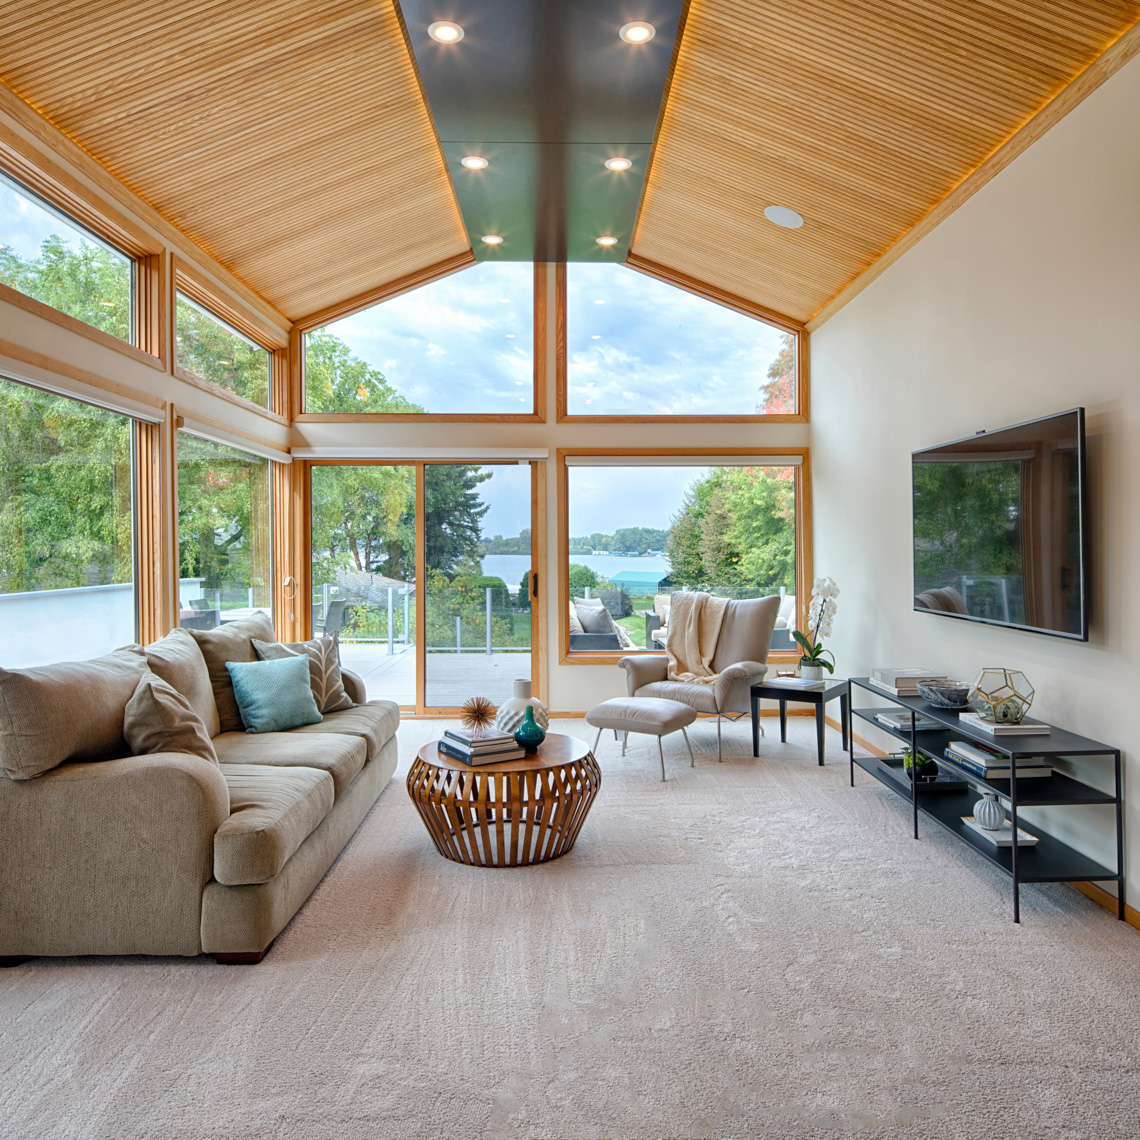 Silverman Be Remarkable specializes in residential architectural photography.  He works for numerous Minnesota interior designers, architectural designers, and landscape architects.